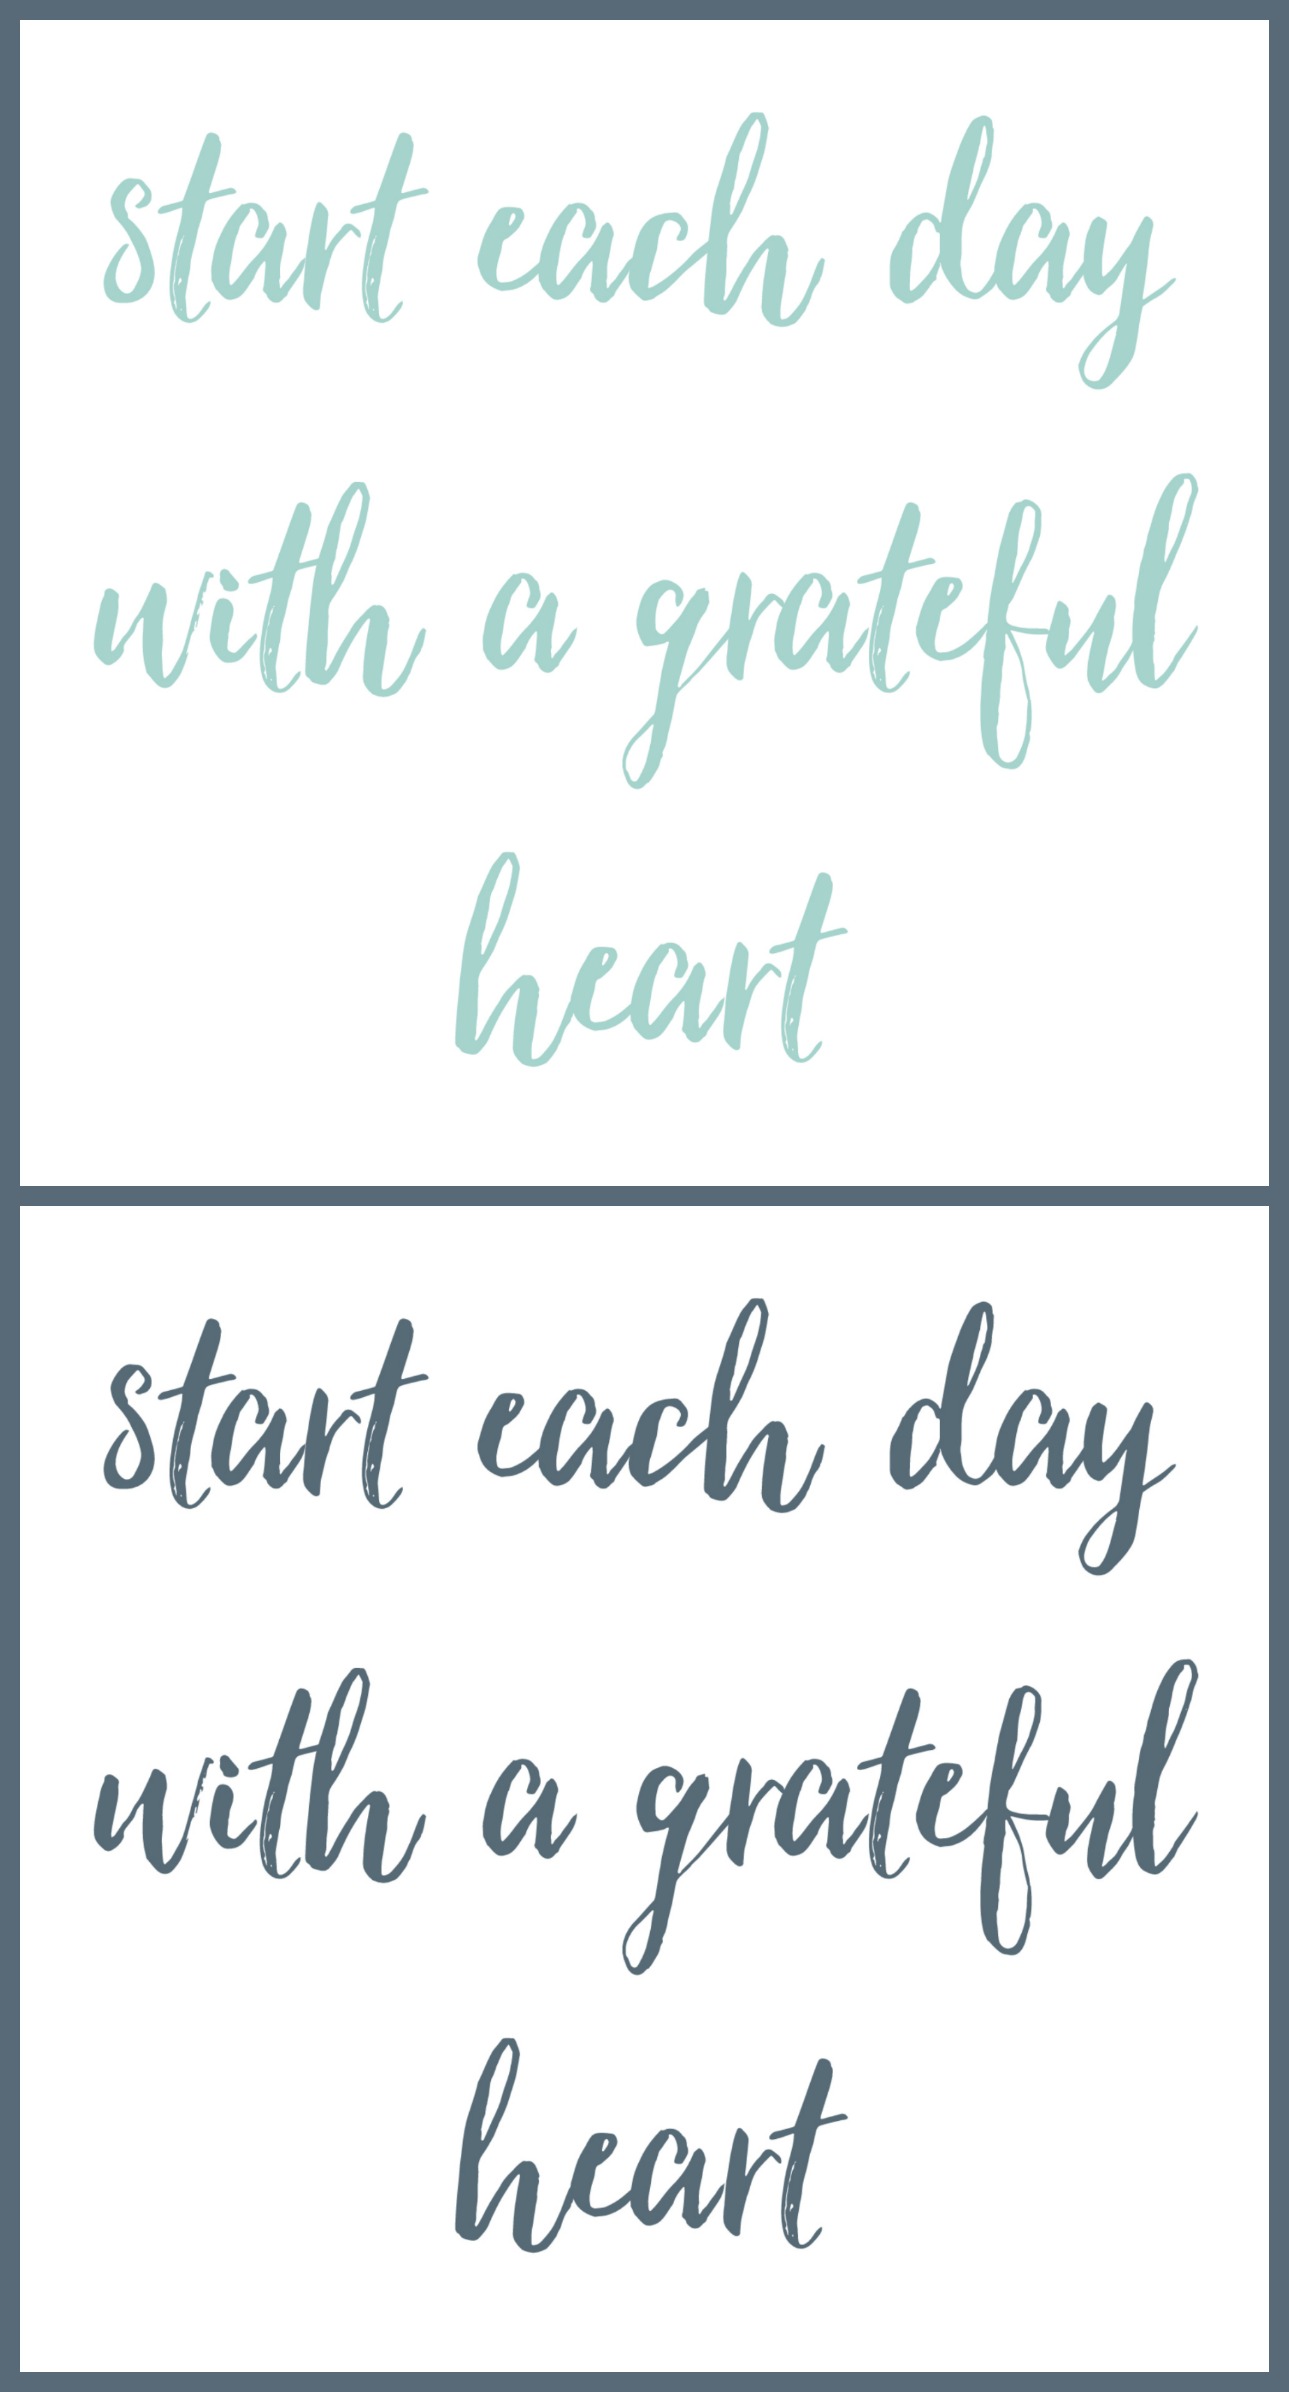 Start each day with a grateful heart free printables in grey and blue